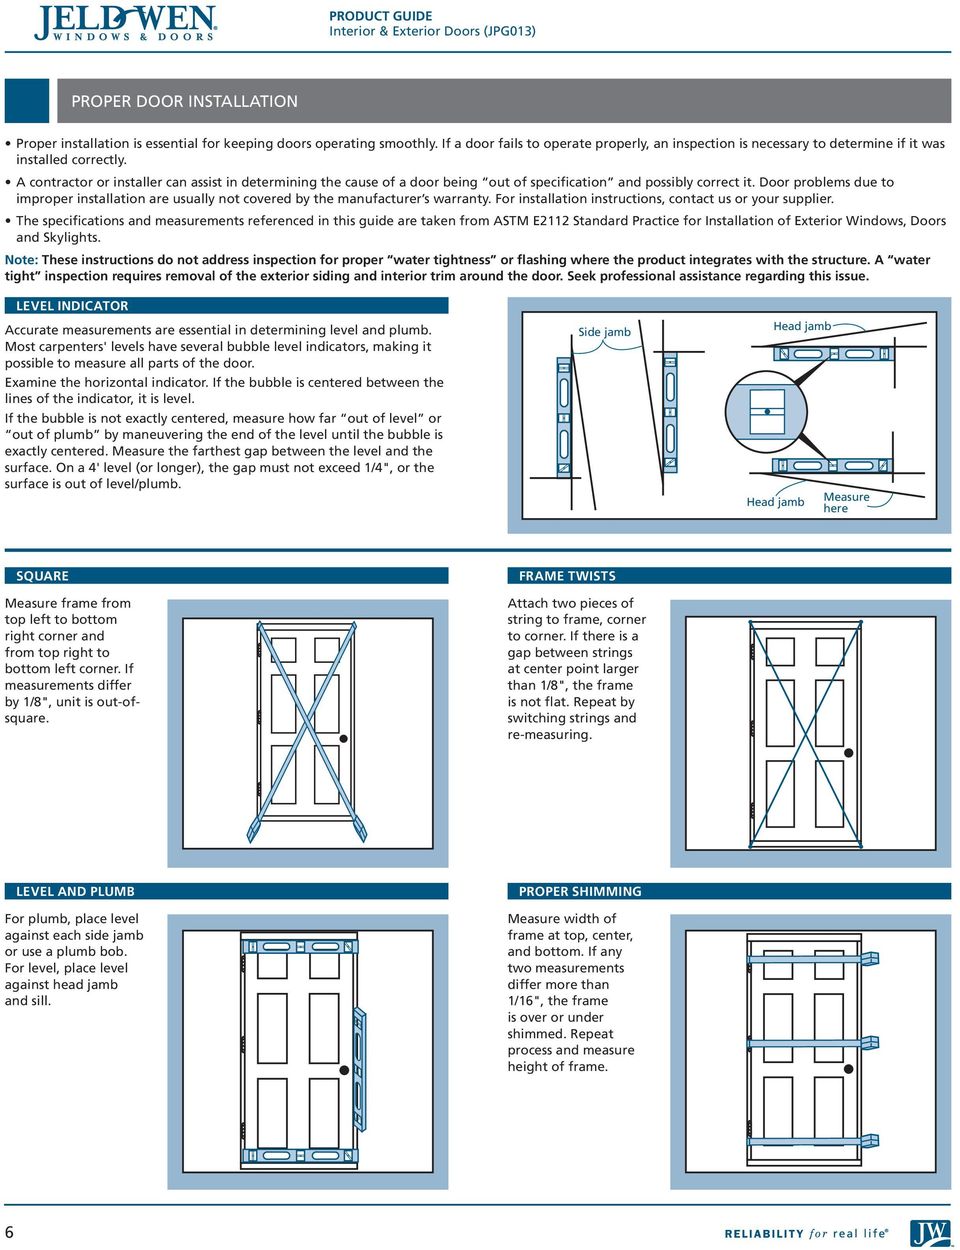 A contractor or installer can assist in determining the cause of a door being out of specification and possibly correct it.